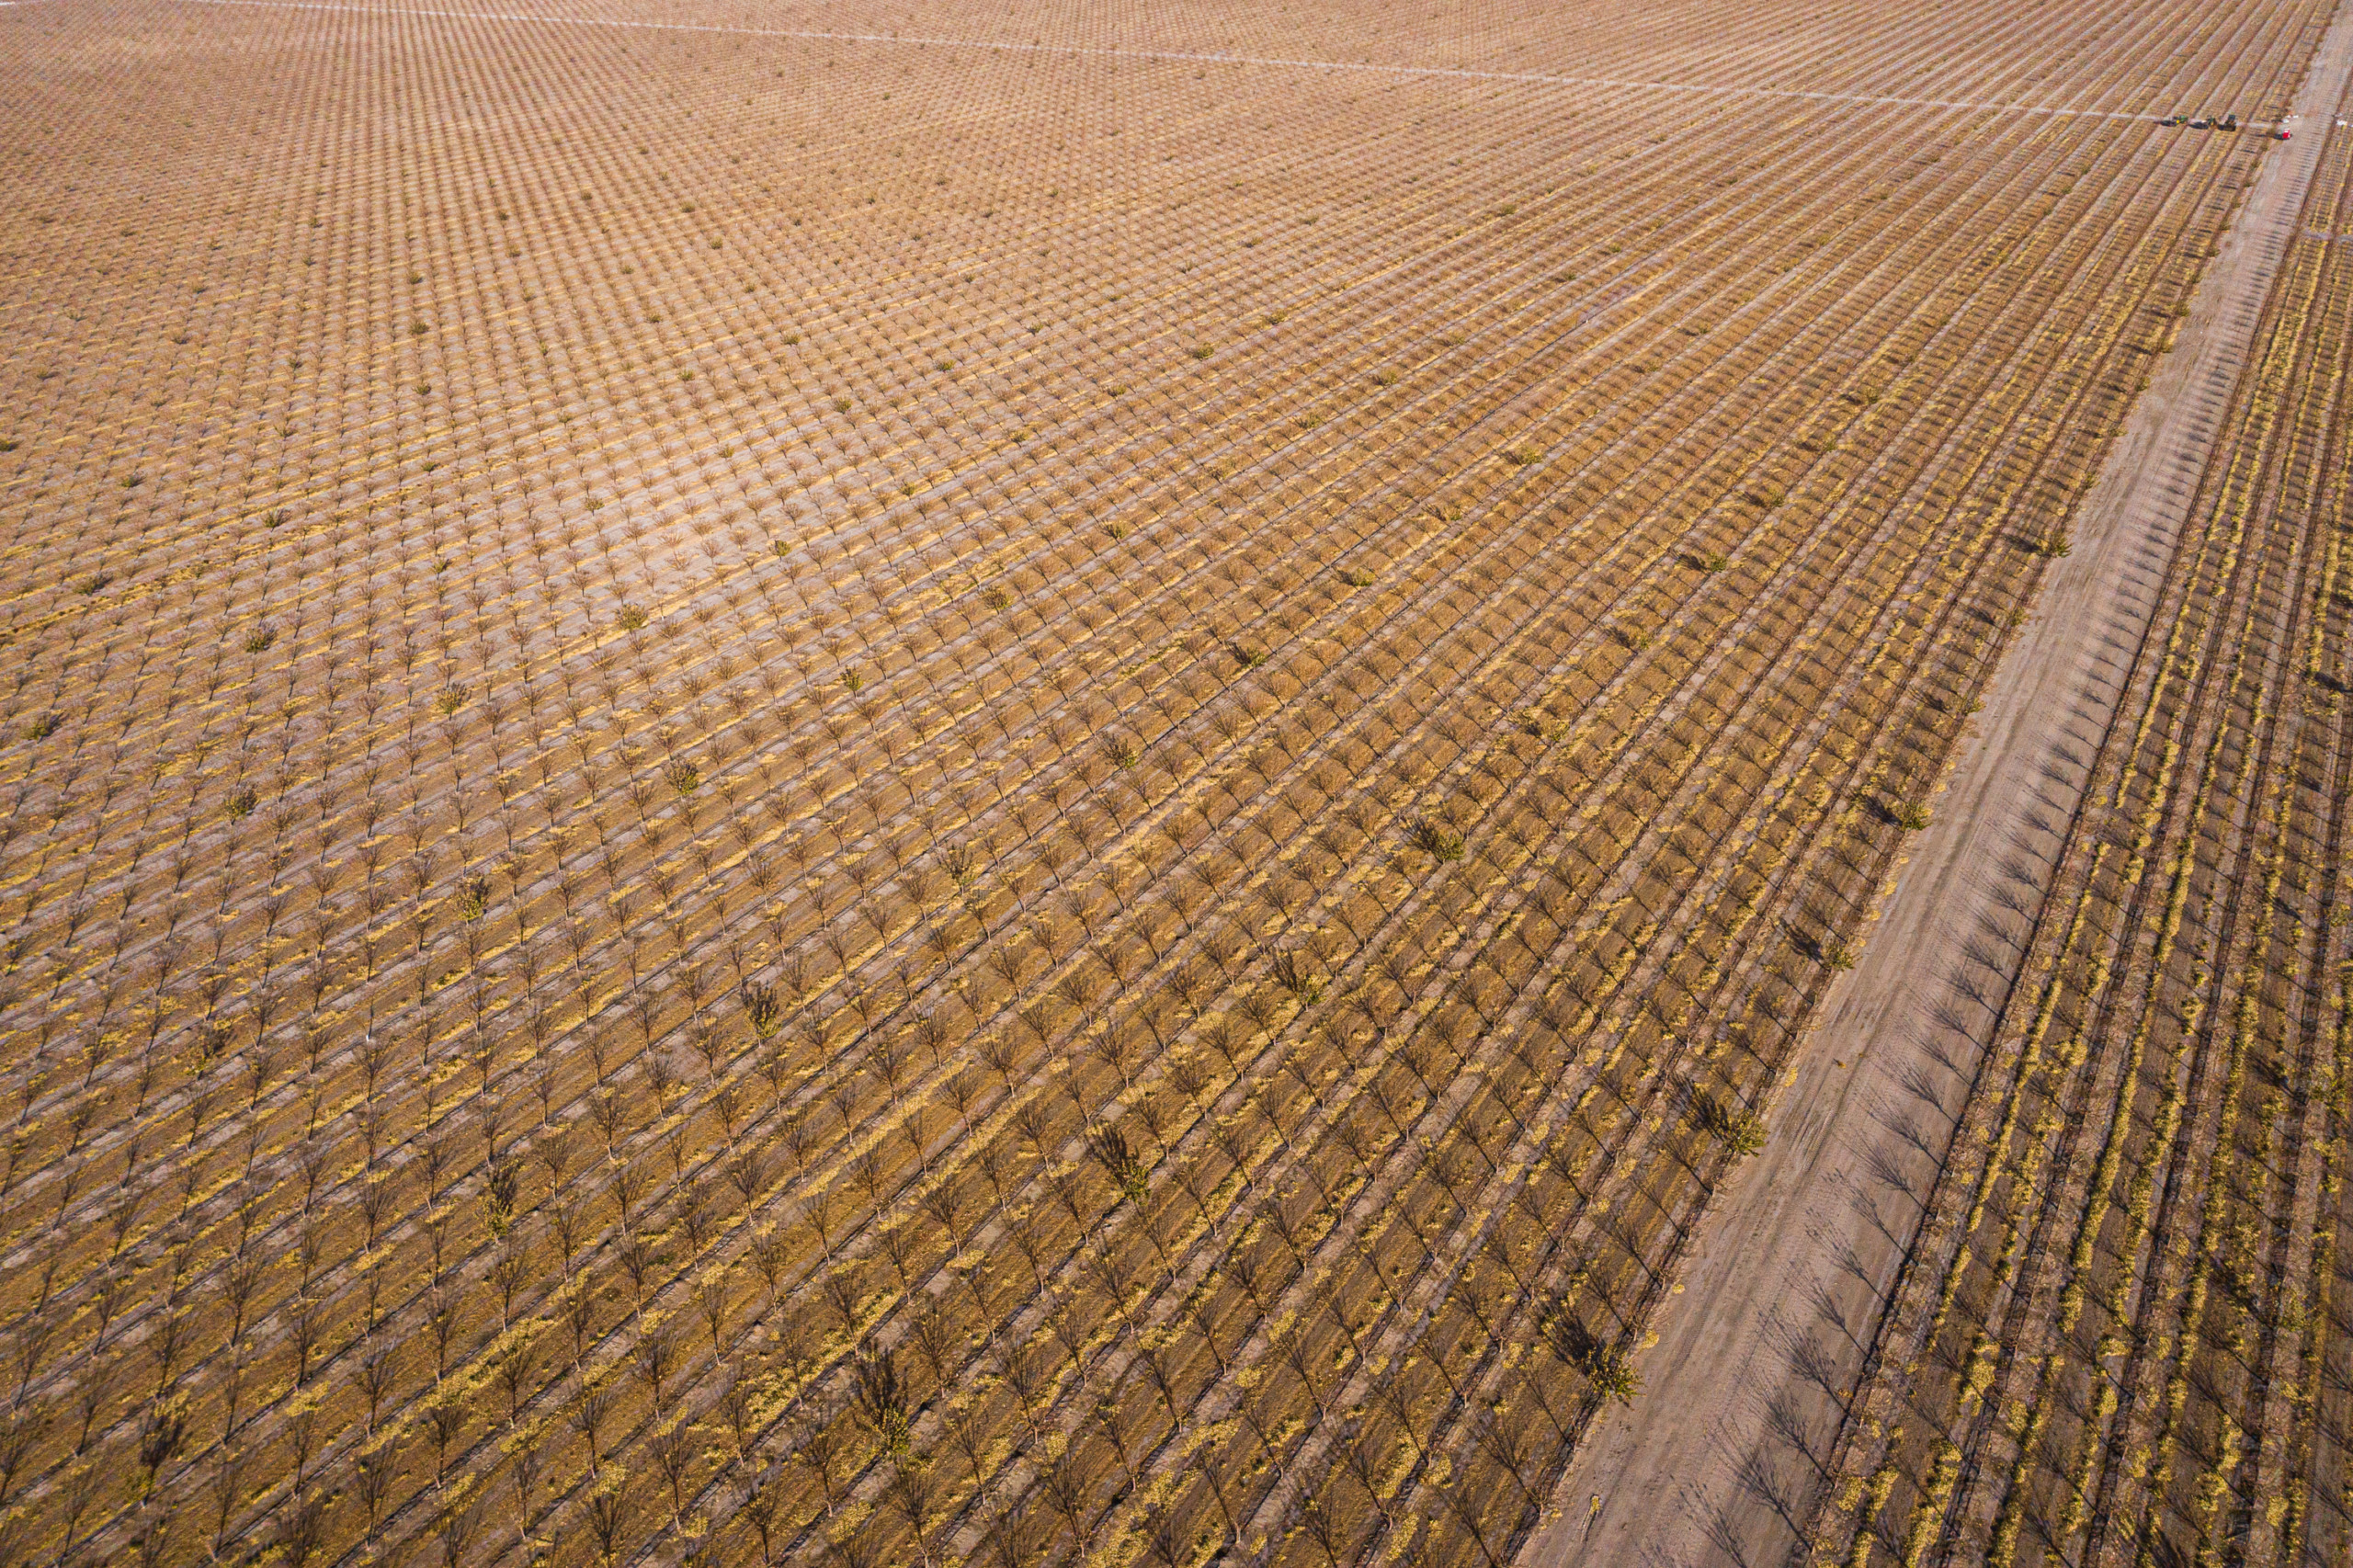 Aerial view of pistachio trees in winter